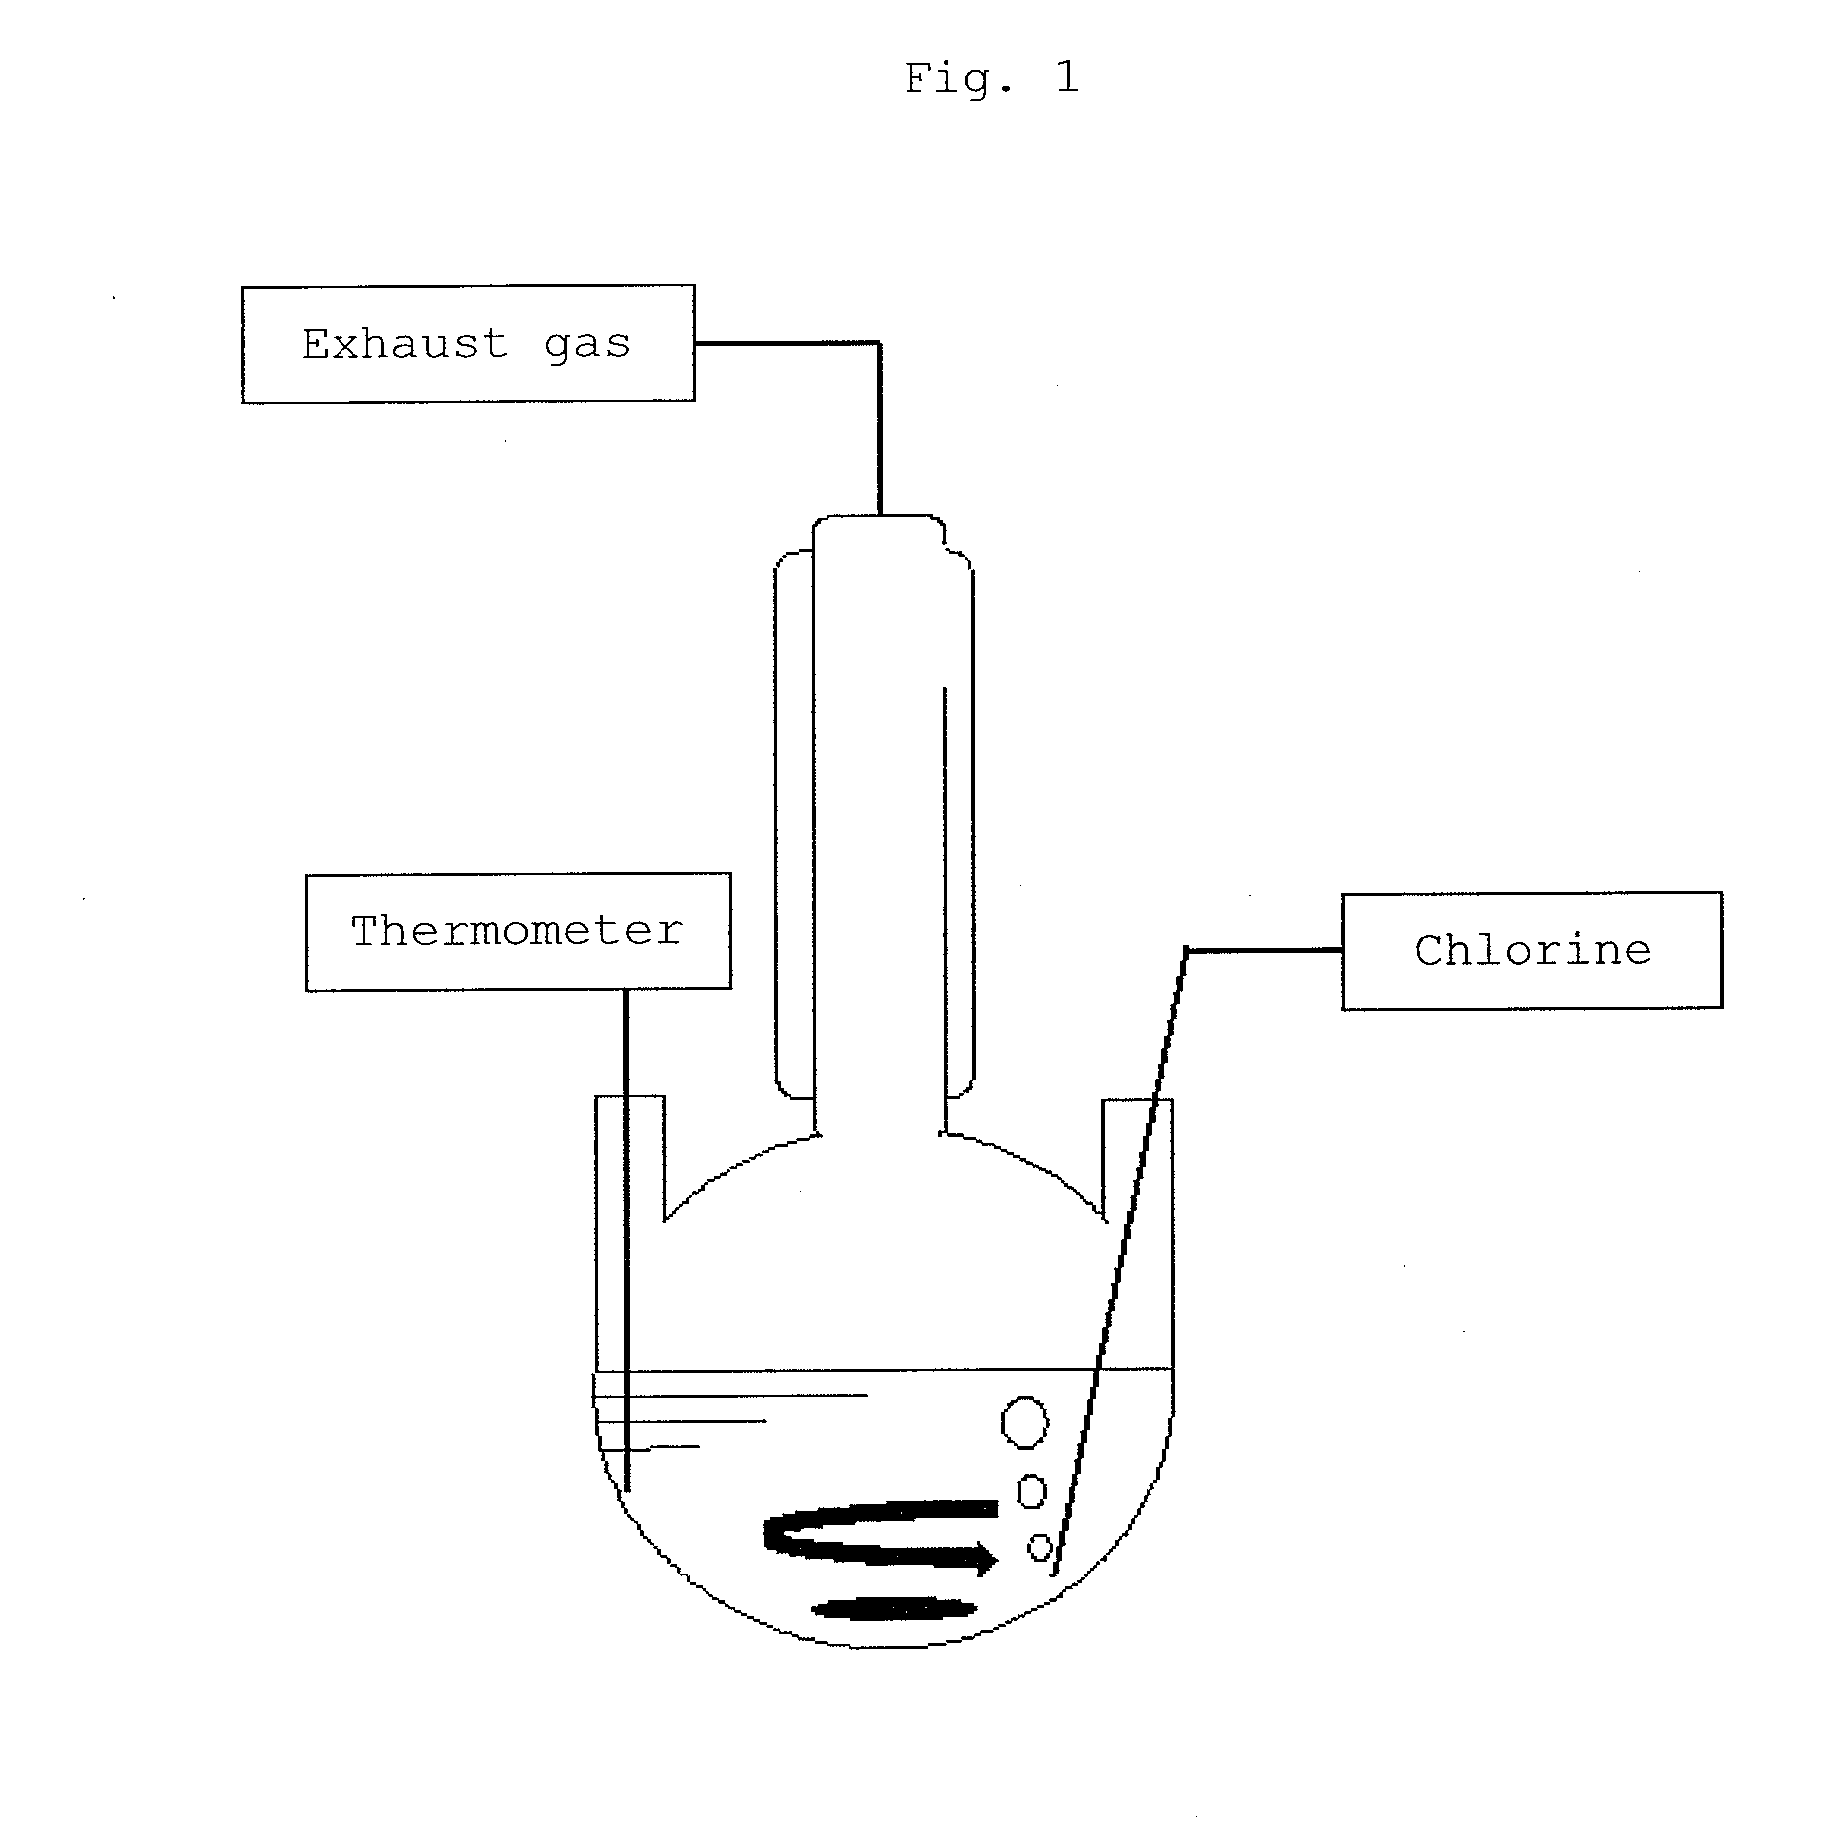 Method for producing a chlorinated hydrocarbon having 3 carbon atoms